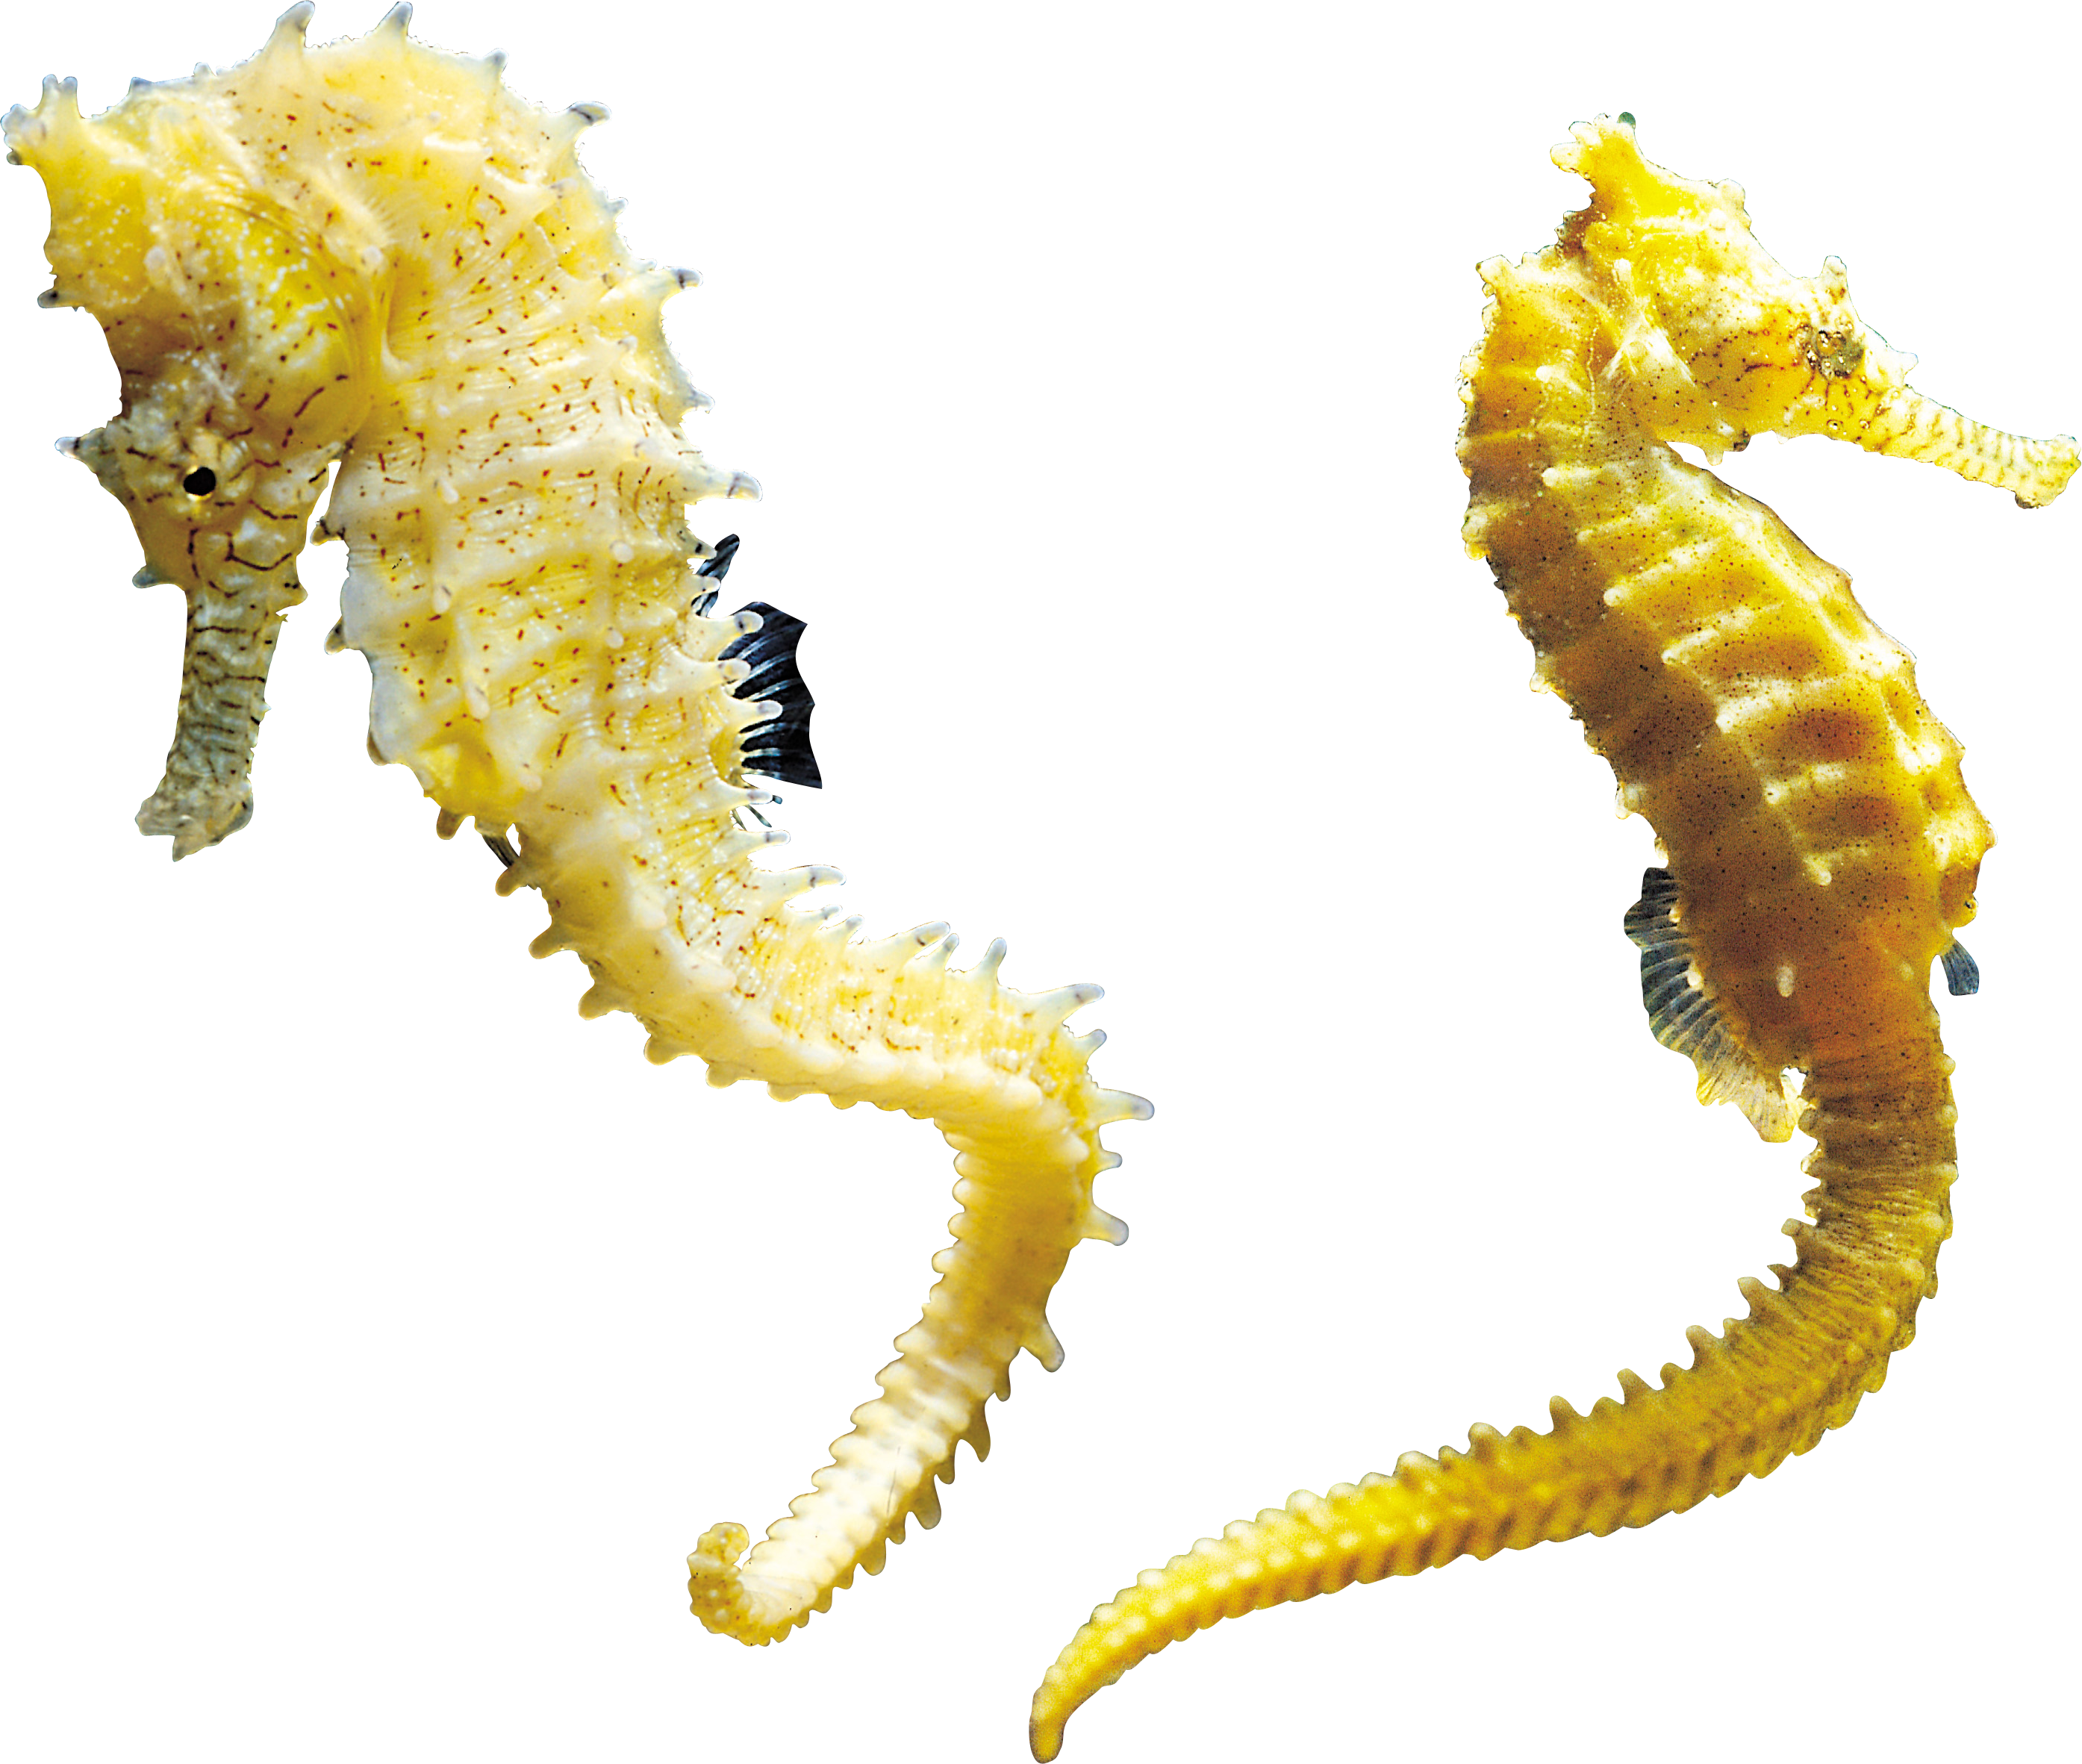 Seahorse PNG images Download